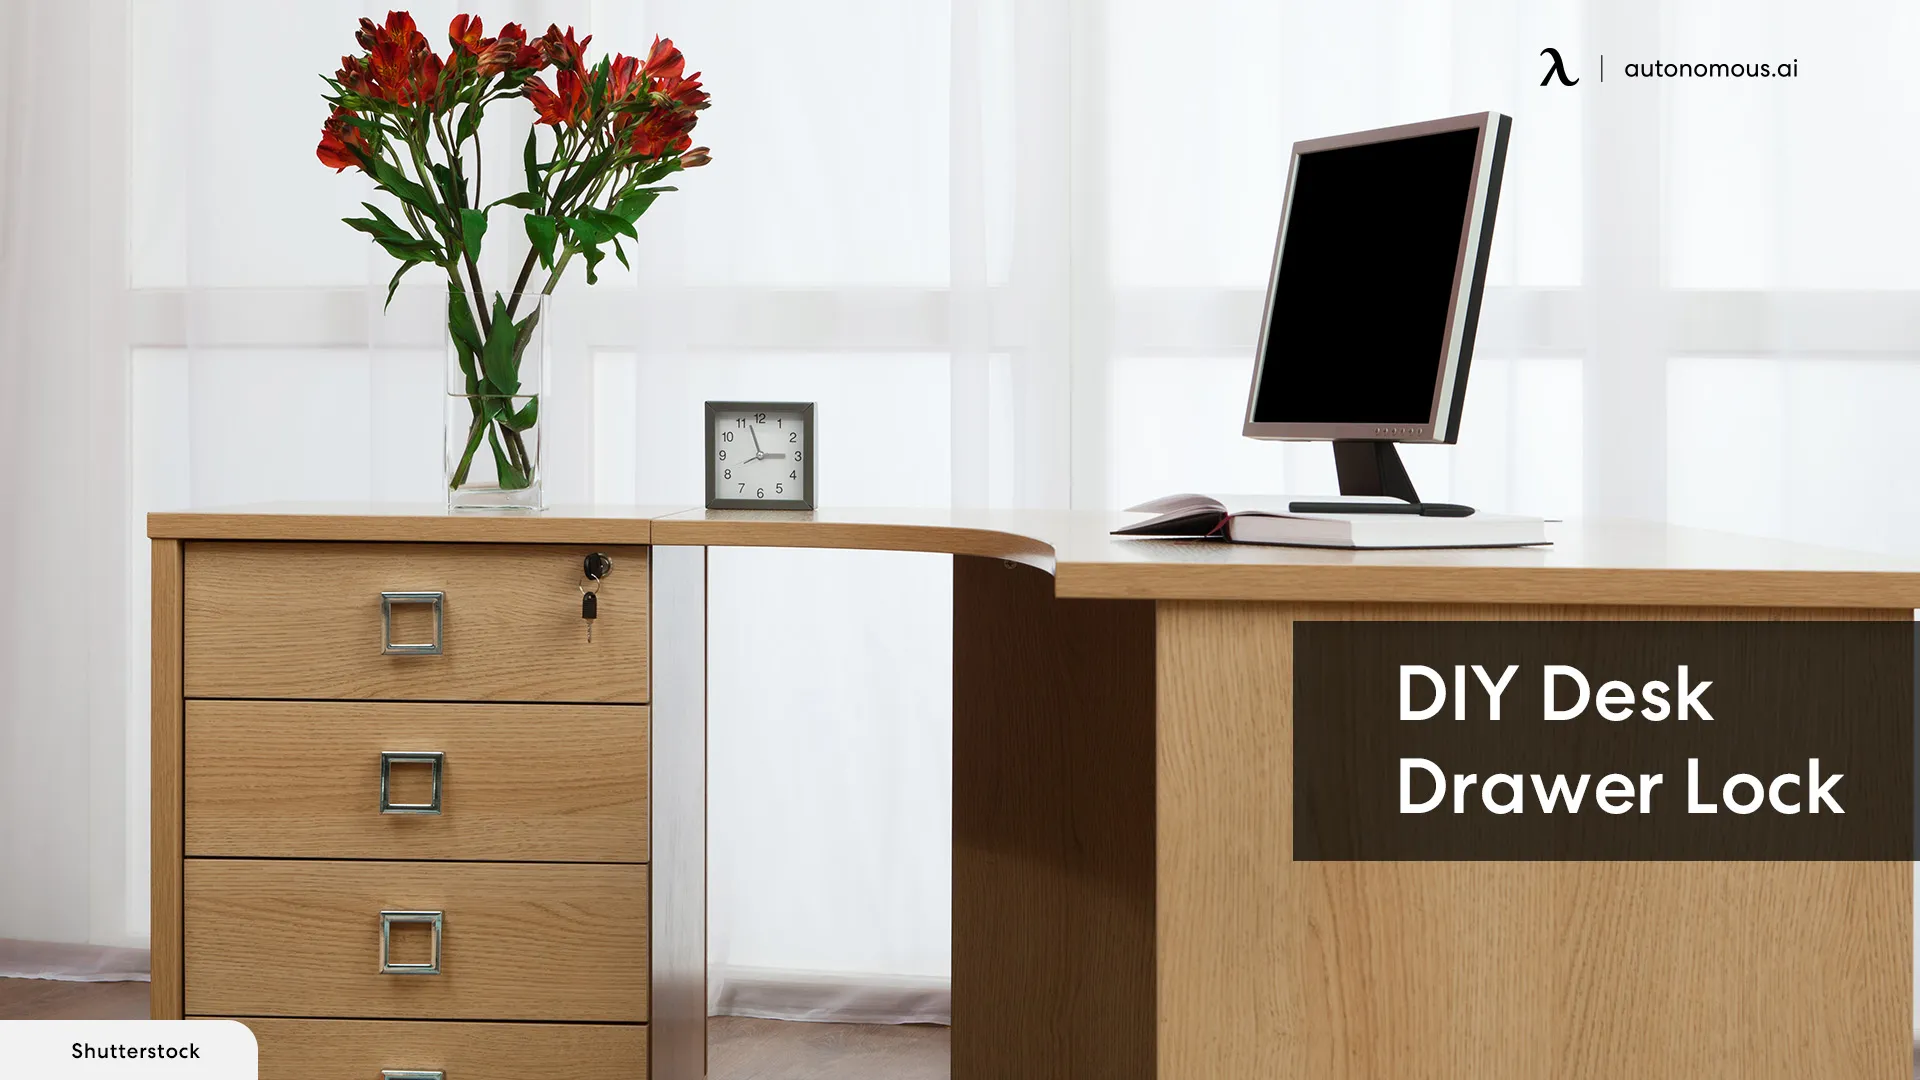 DIY Desk Drawer Lock: Secure Your Valuables with Ease